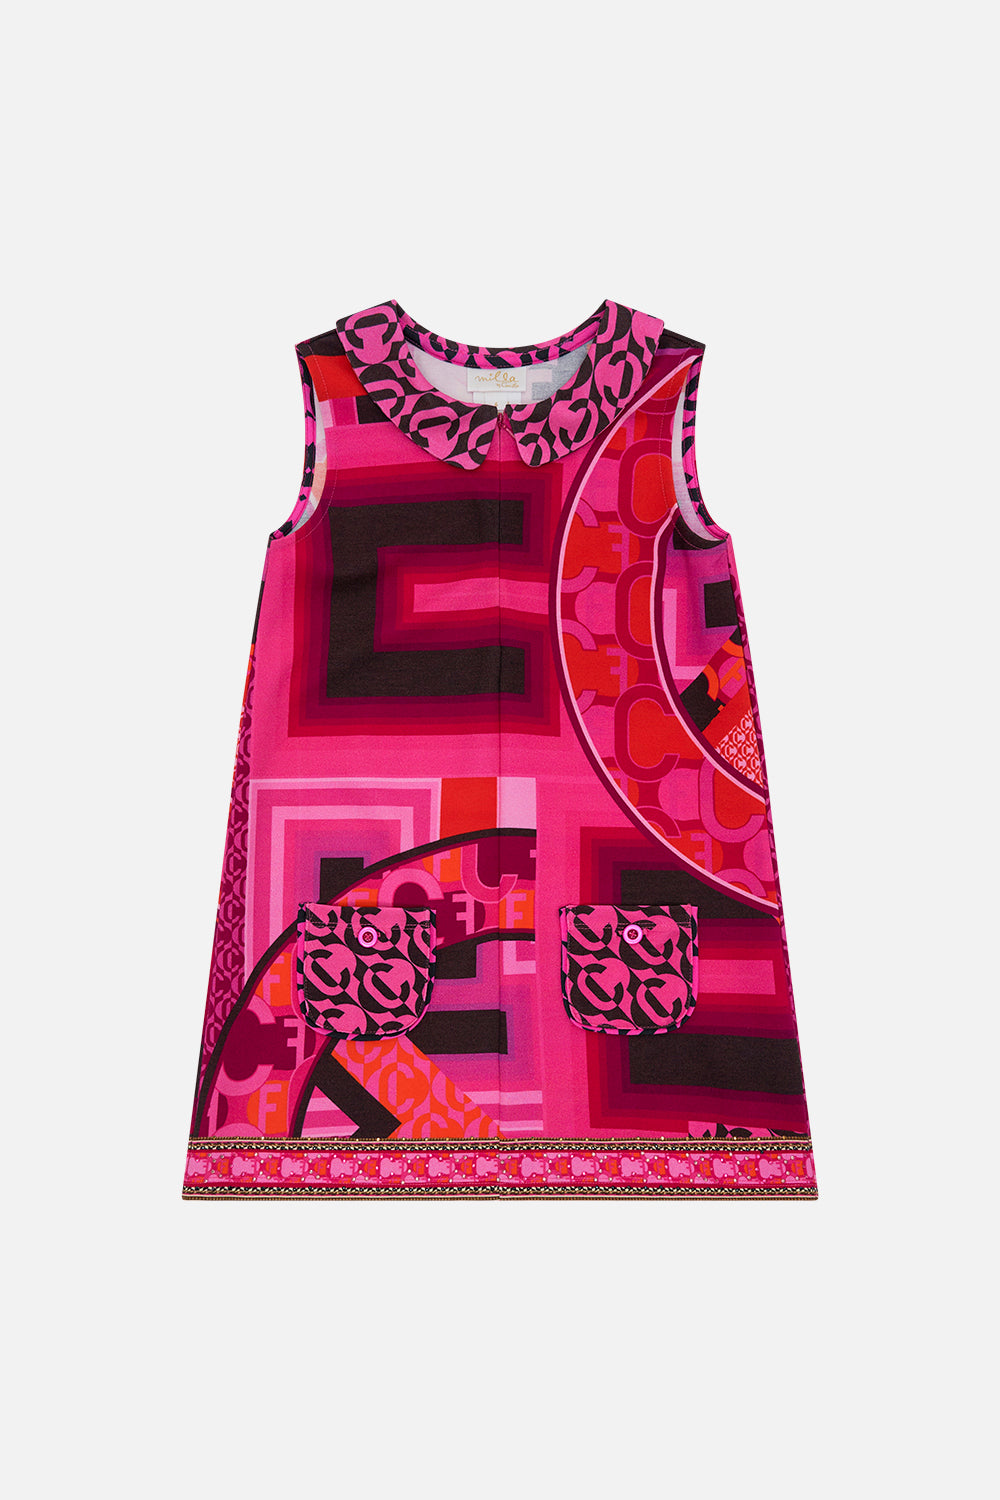 Product view of MILLA BY CAMILLA kids pink shift dress in Ciao Palazzo print